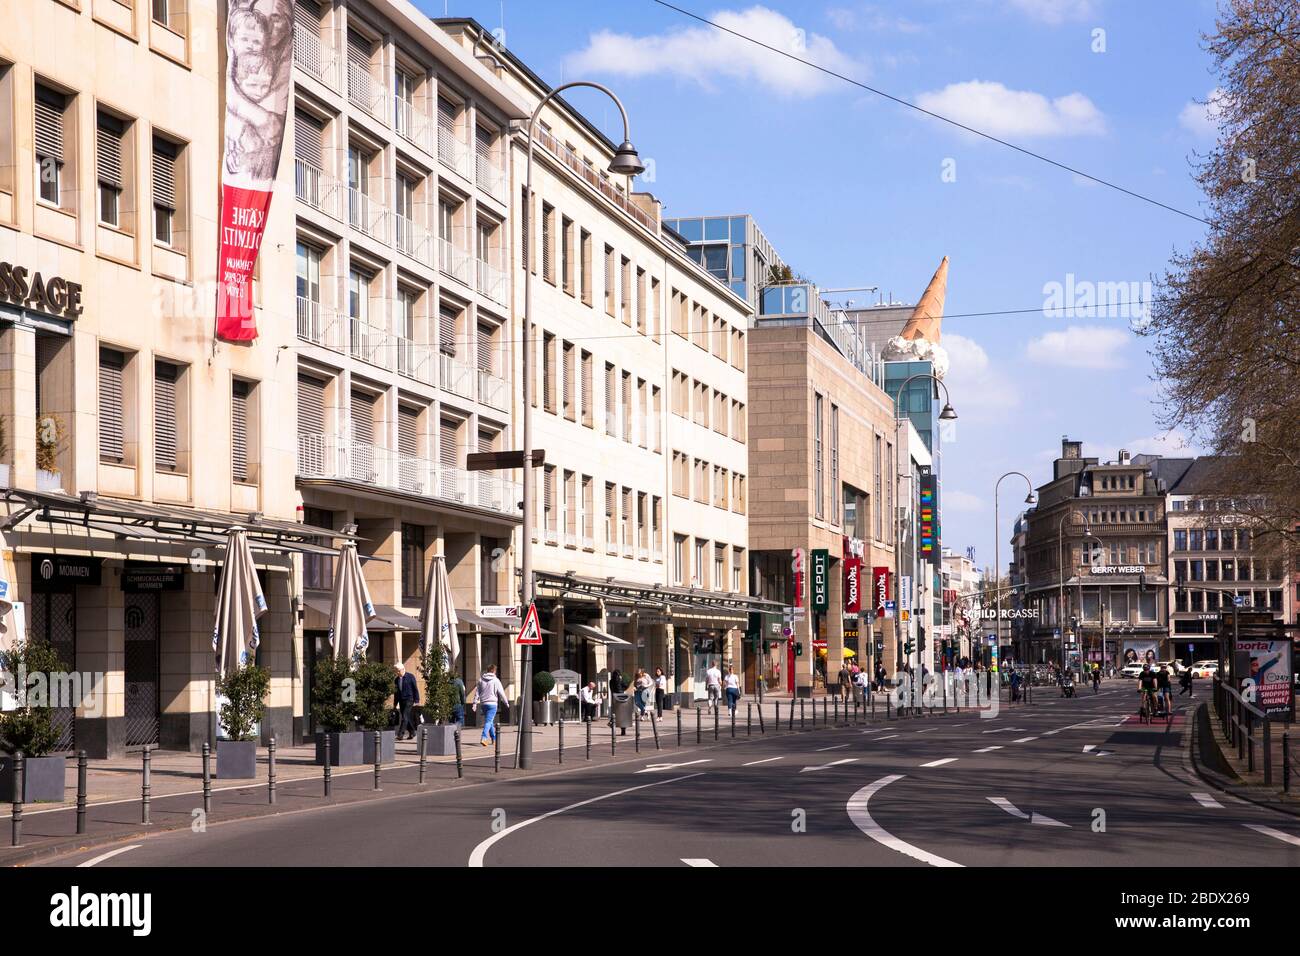 Coronavirus / Covid 19 outbreak, April 7th. 2020. Only few people and low traffic on Neumarkt, Cologne, Germany.  Coronavirus / Covid 19 Krise, 7. Apr Stock Photo